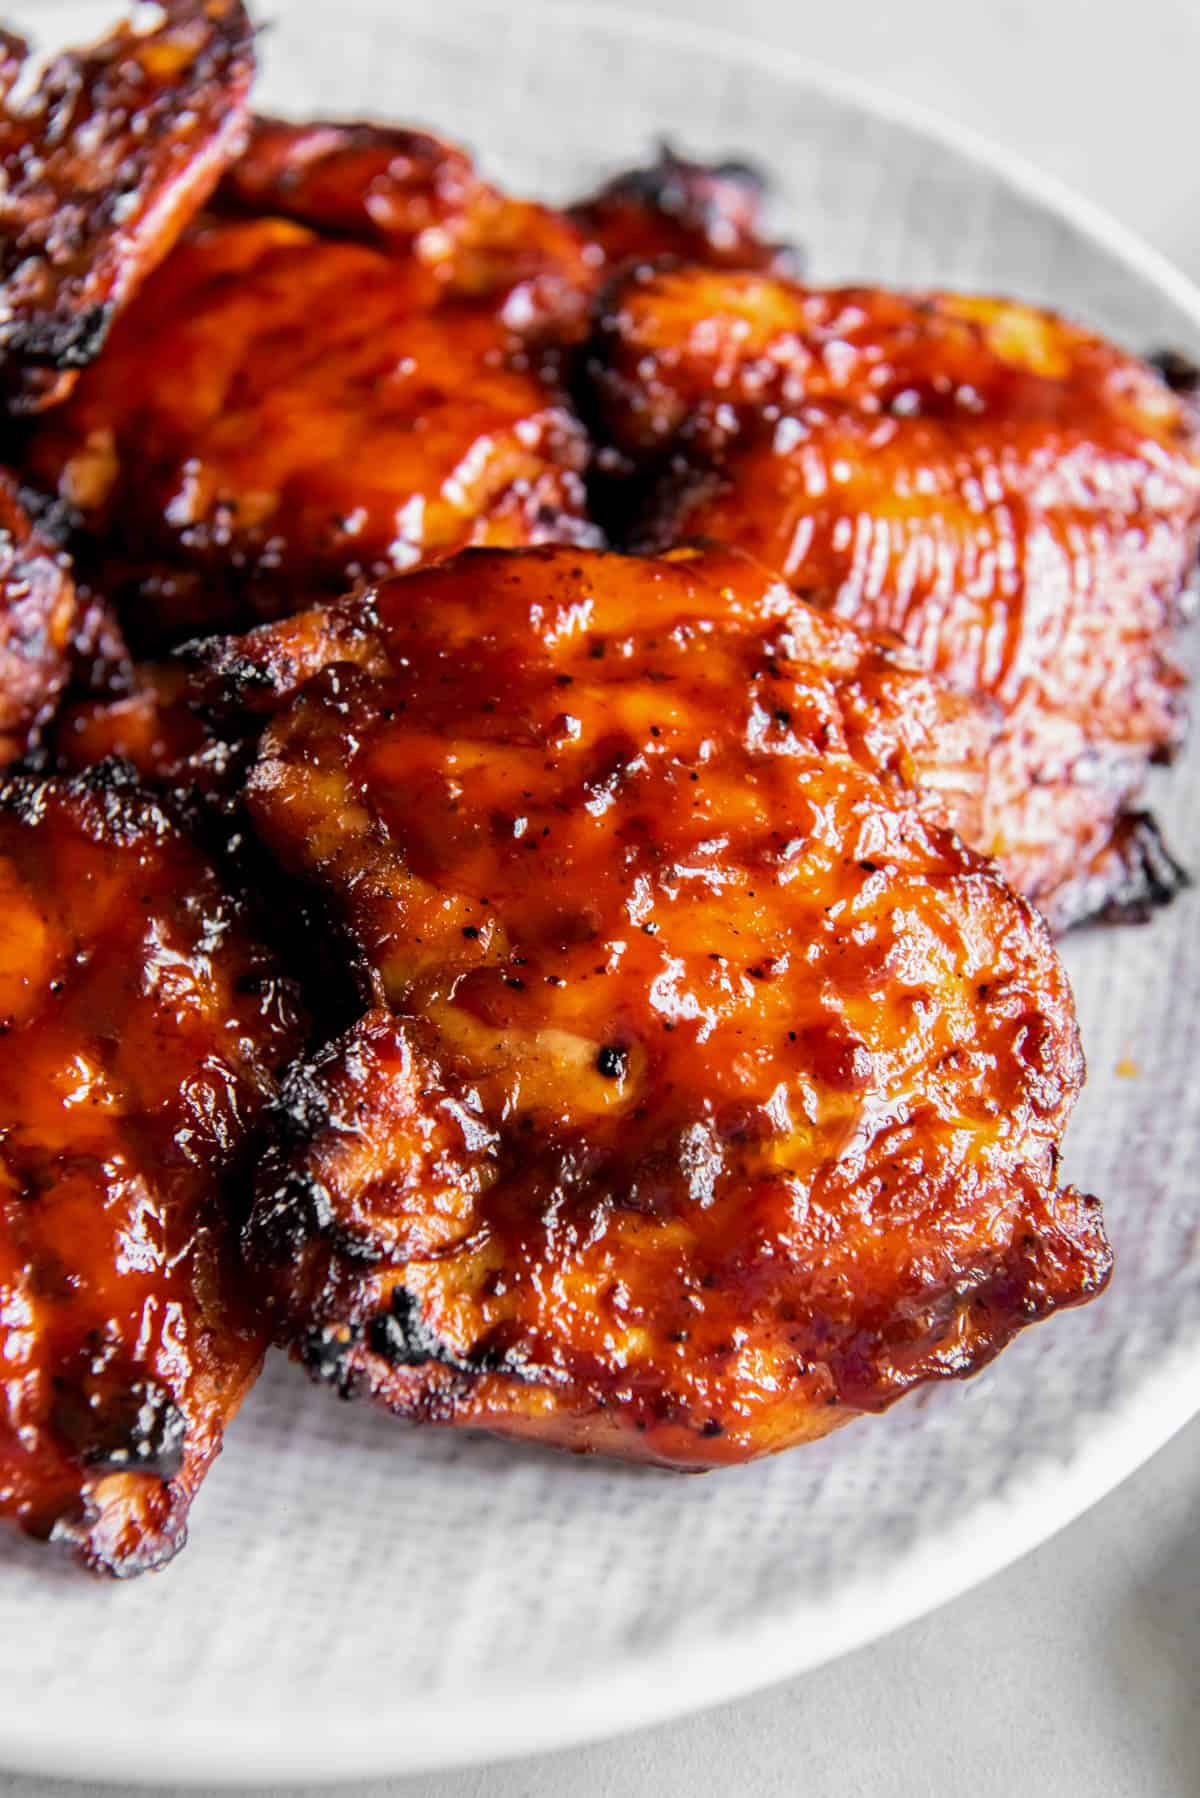 BBQ boneless skinless chicken thighs on a plate for serving.